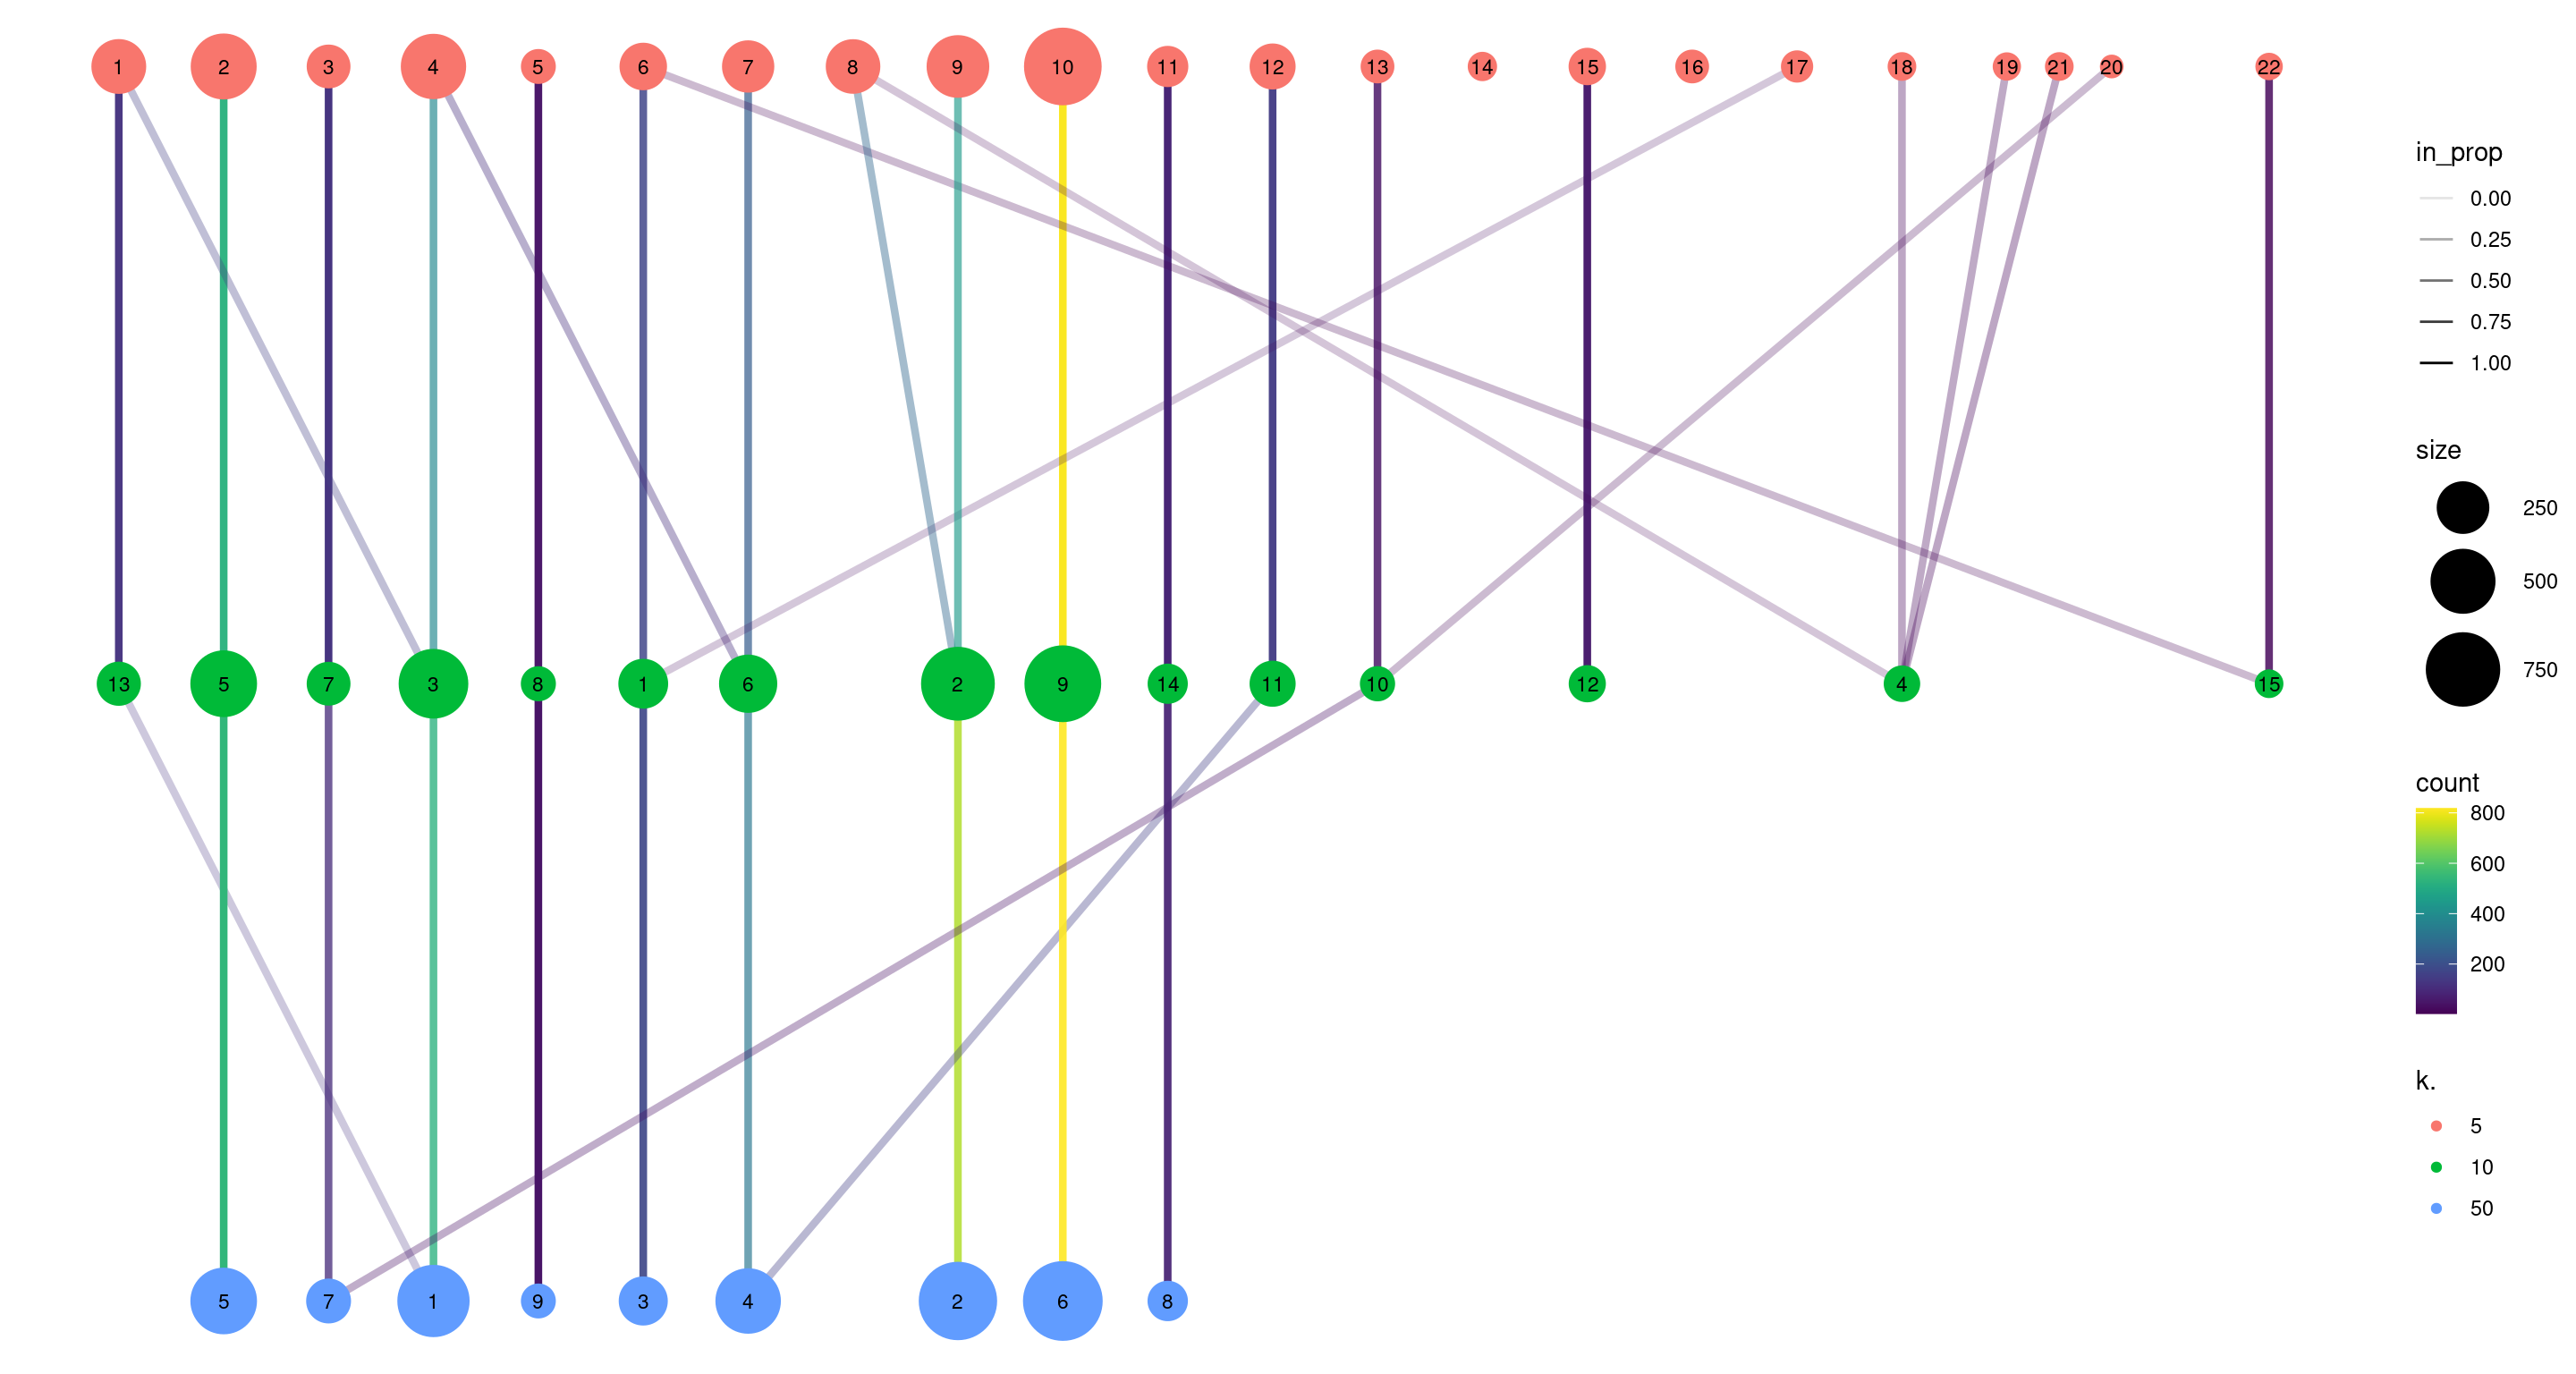 Graph of the relationships between the Walktrap clusterings of the PBMC dataset, generated with varying $k$ during the nearest-neighbor graph construction. (A higher $k$ generally corresponds to a lower resolution clustering.) The size of the nodes is proportional to the number of cells in each cluster, and the edges depict cells in one cluster that are reassigned to another cluster at a different resolution. The color of the edges is defined according to the number of reassigned cells and the opacity is defined from the corresponding proportion relative to the size of the lower-resolution cluster.